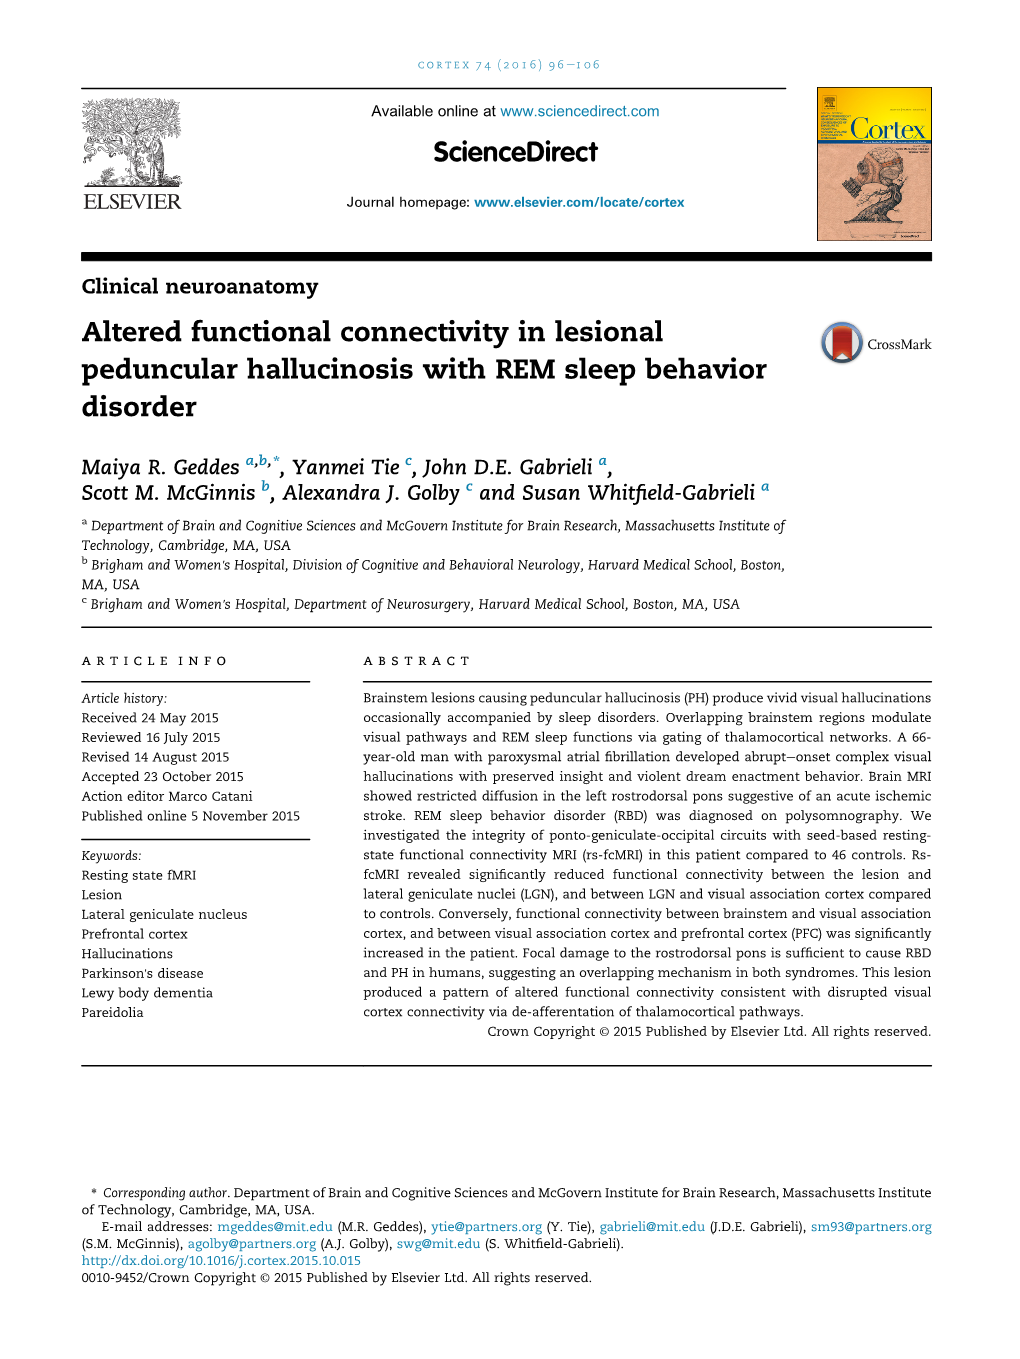 Altered Functional Connectivity in Lesional Peduncular Hallucinosis with REM Sleep Behavior Disorder